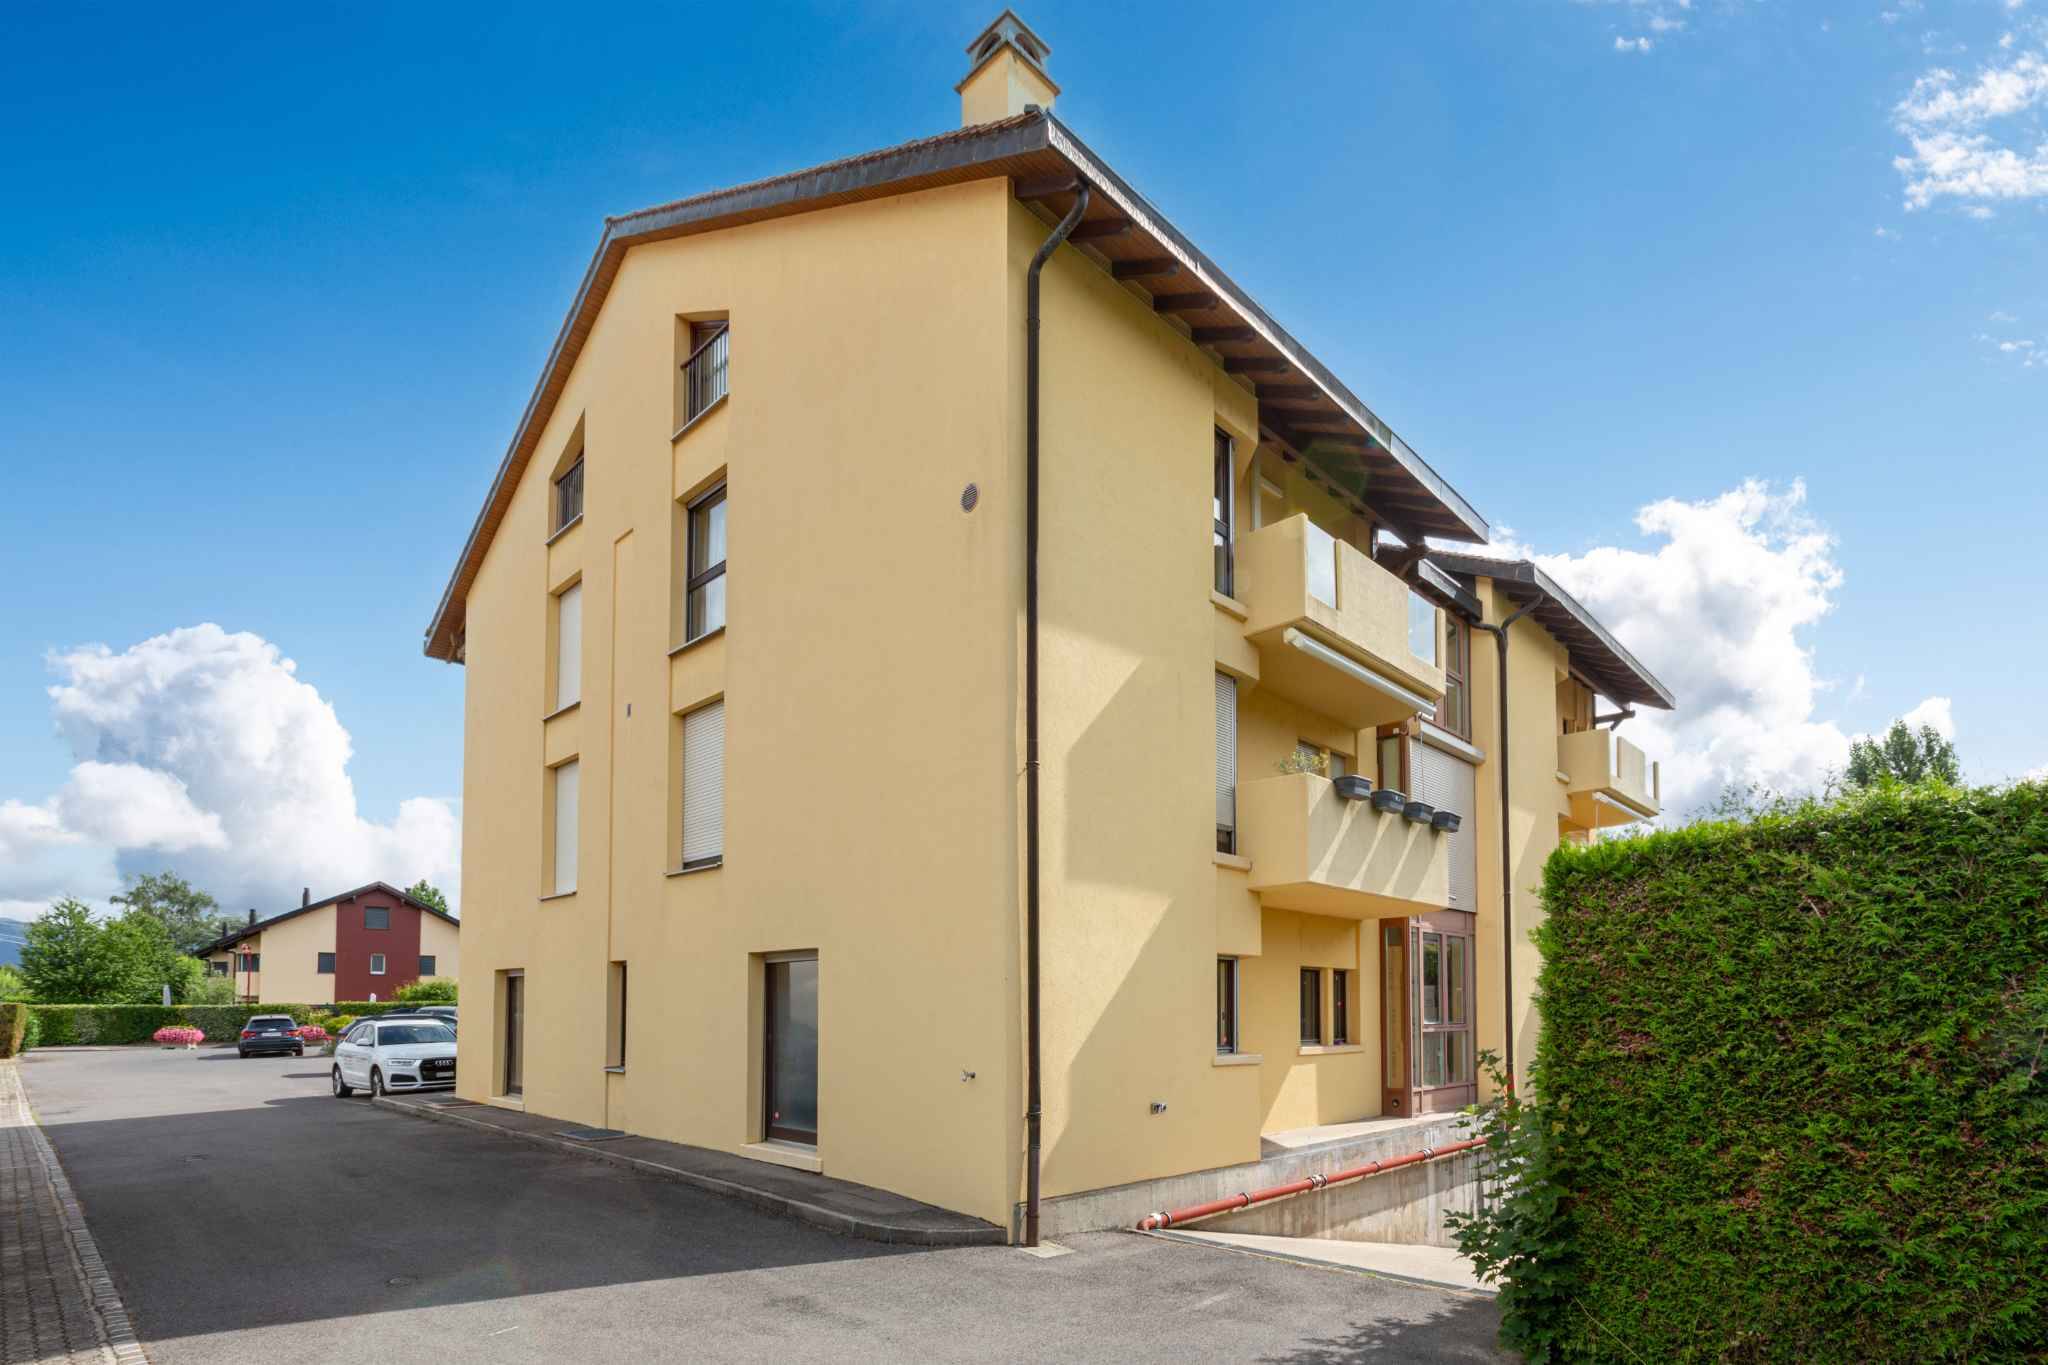 À vendre : Appartement 1 chambres Bogis-Bossey - Ref : 38881 | Naef Immobilier